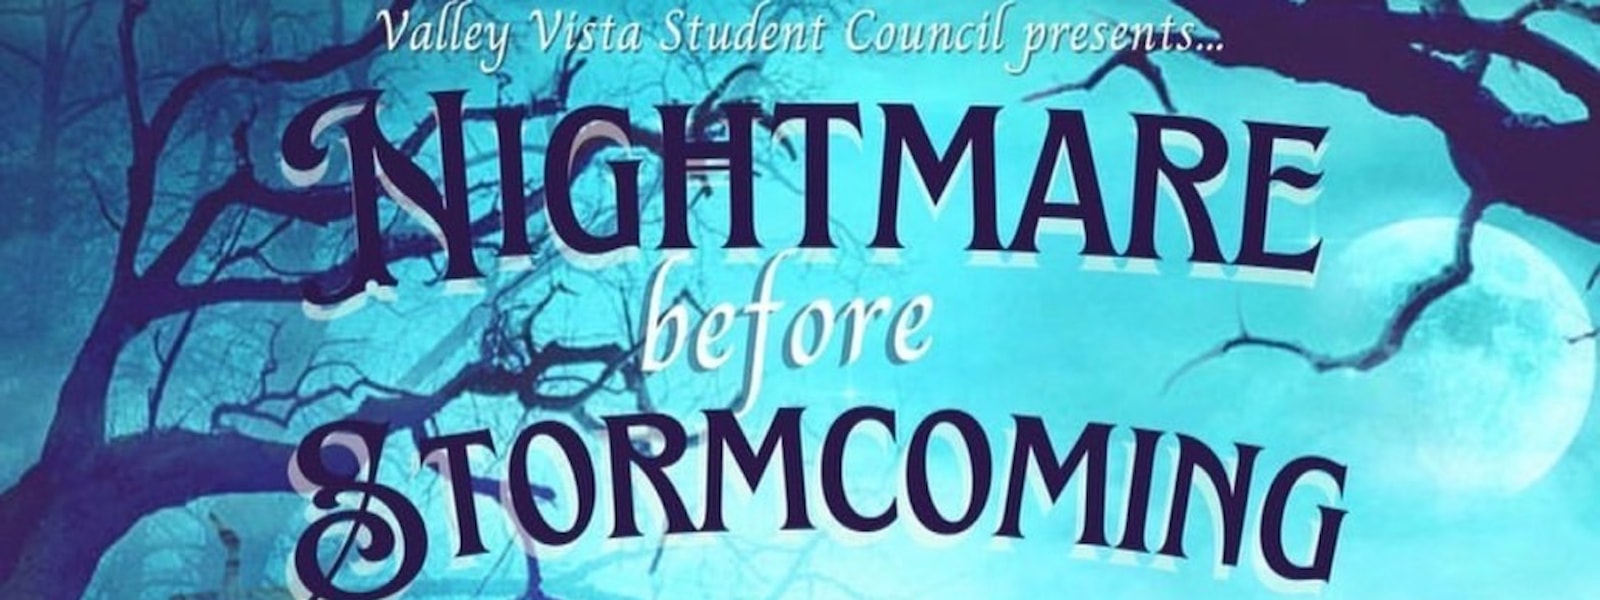 Valley Vista Student Council presents Nightmare before Stormcoming